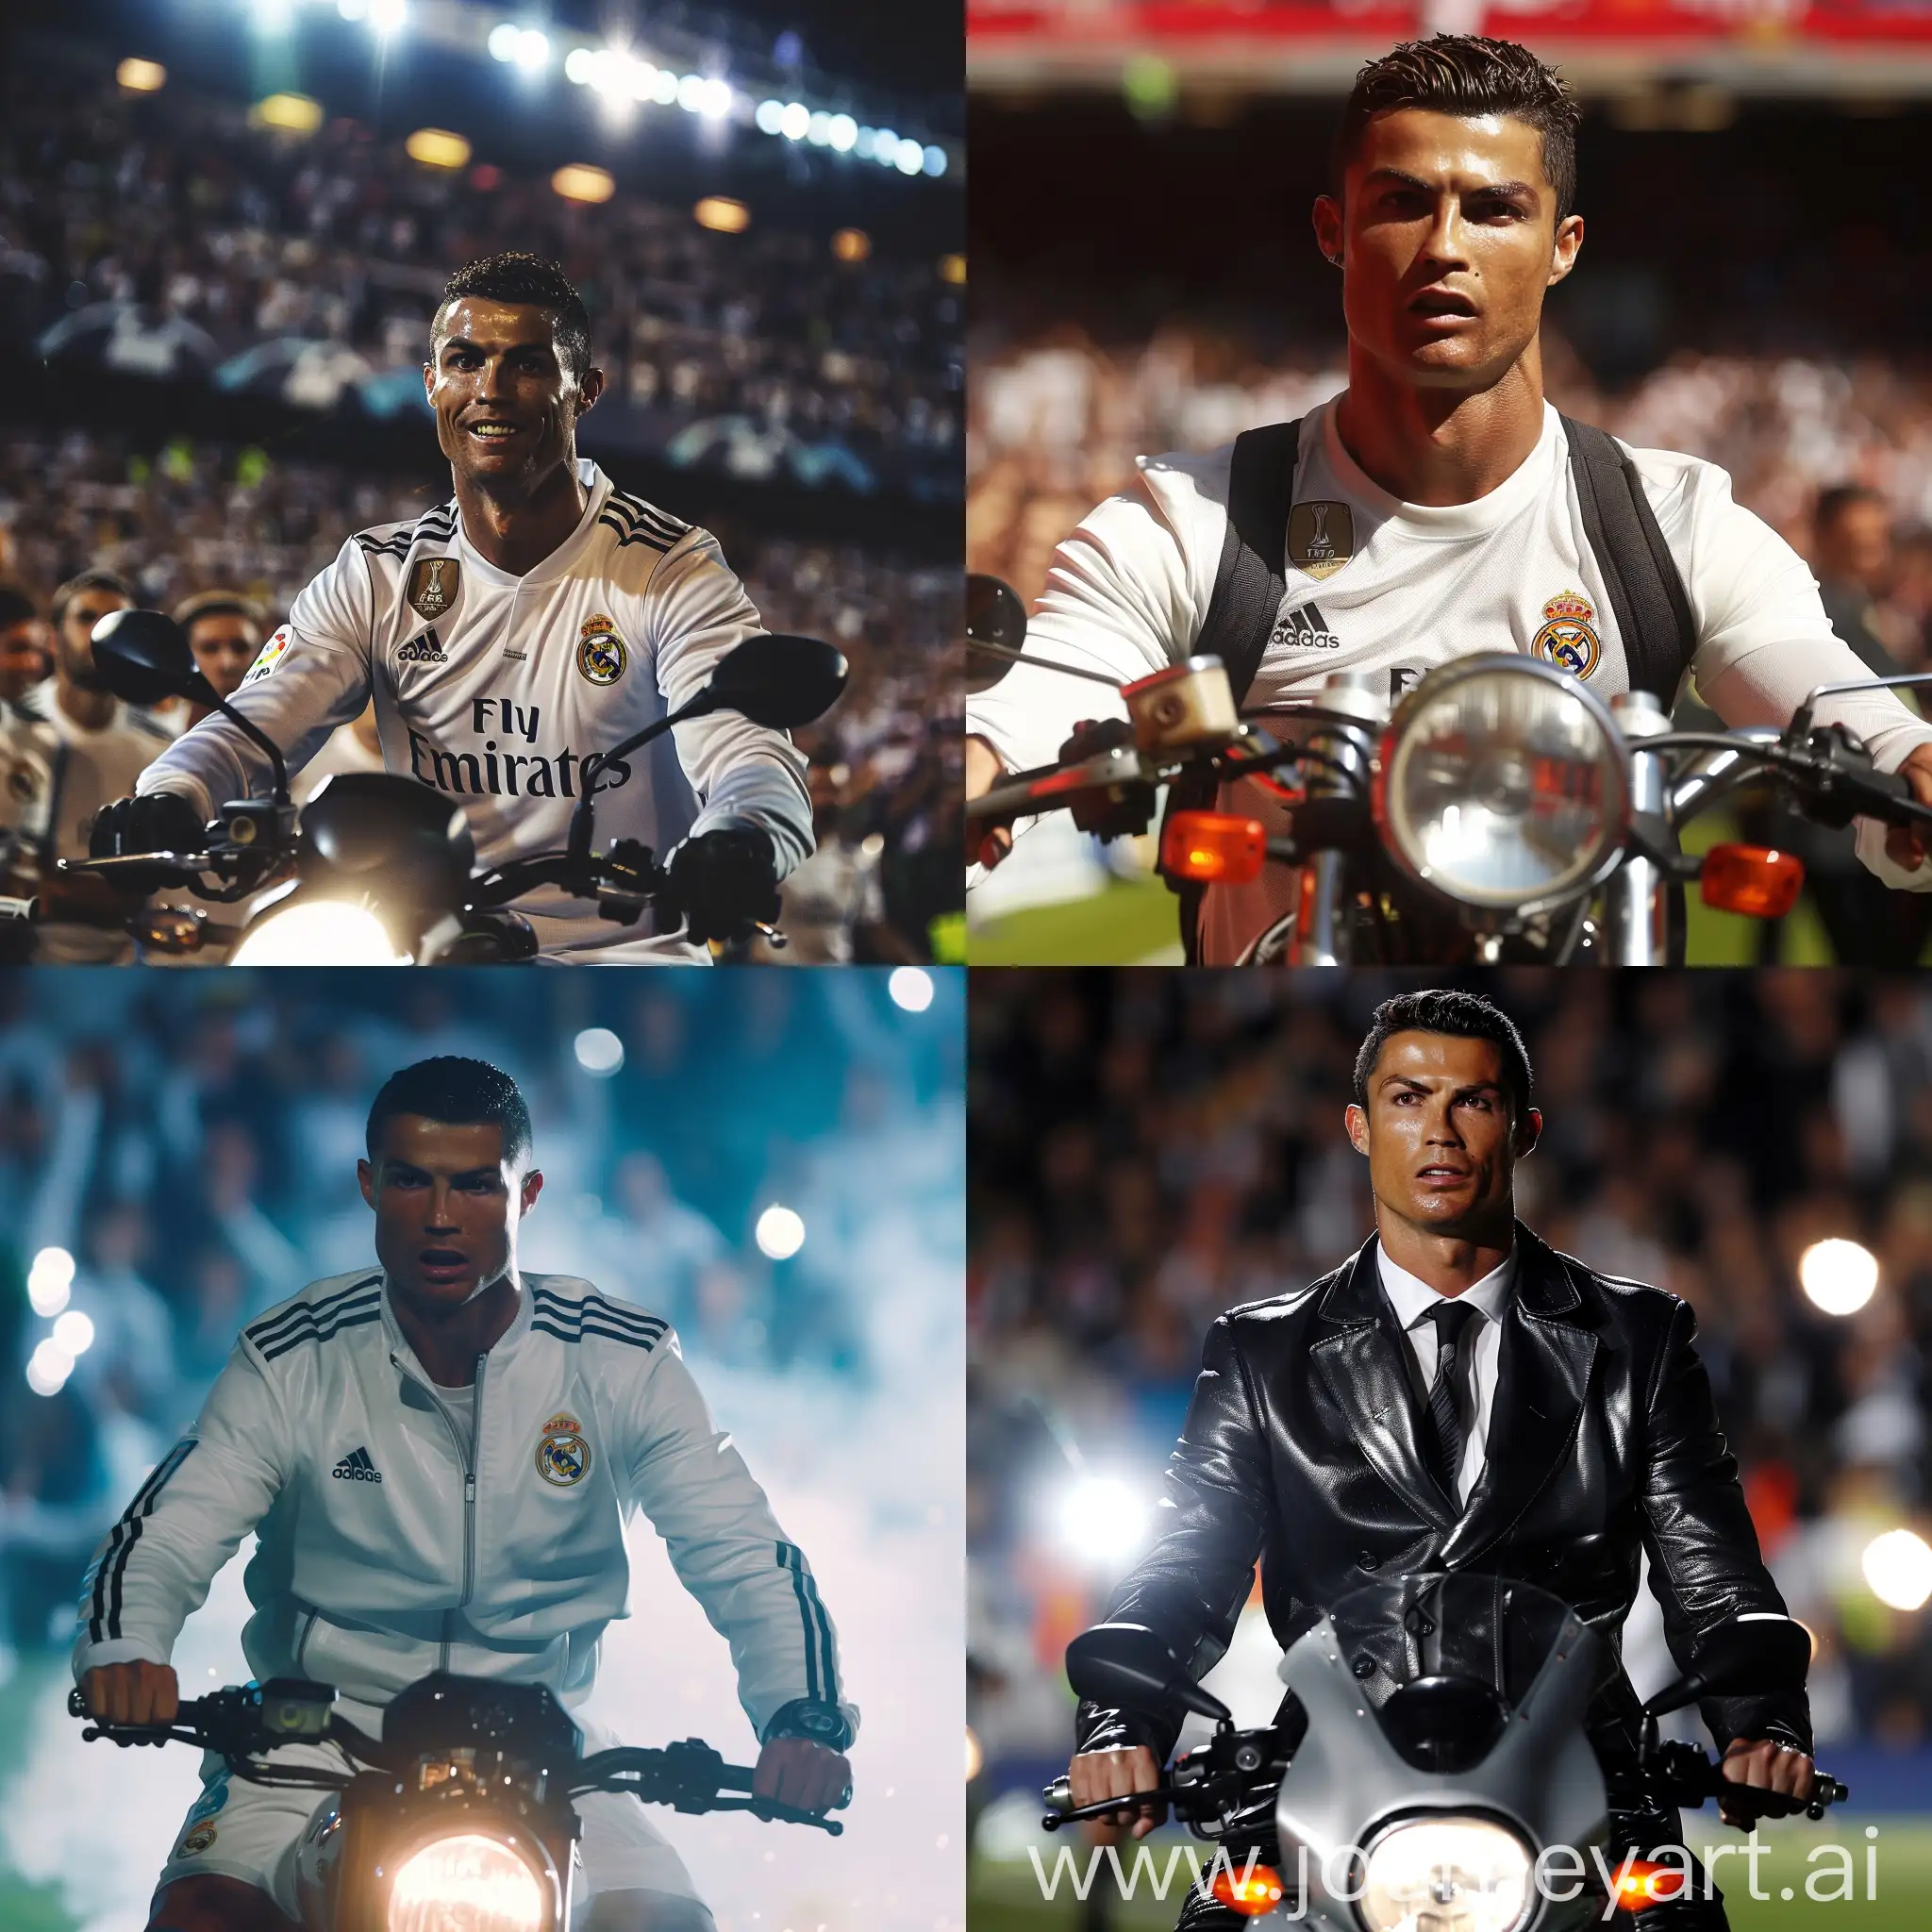 cinematic image of cristiano ronaldo making his entrance to the stadium riding a motorbike